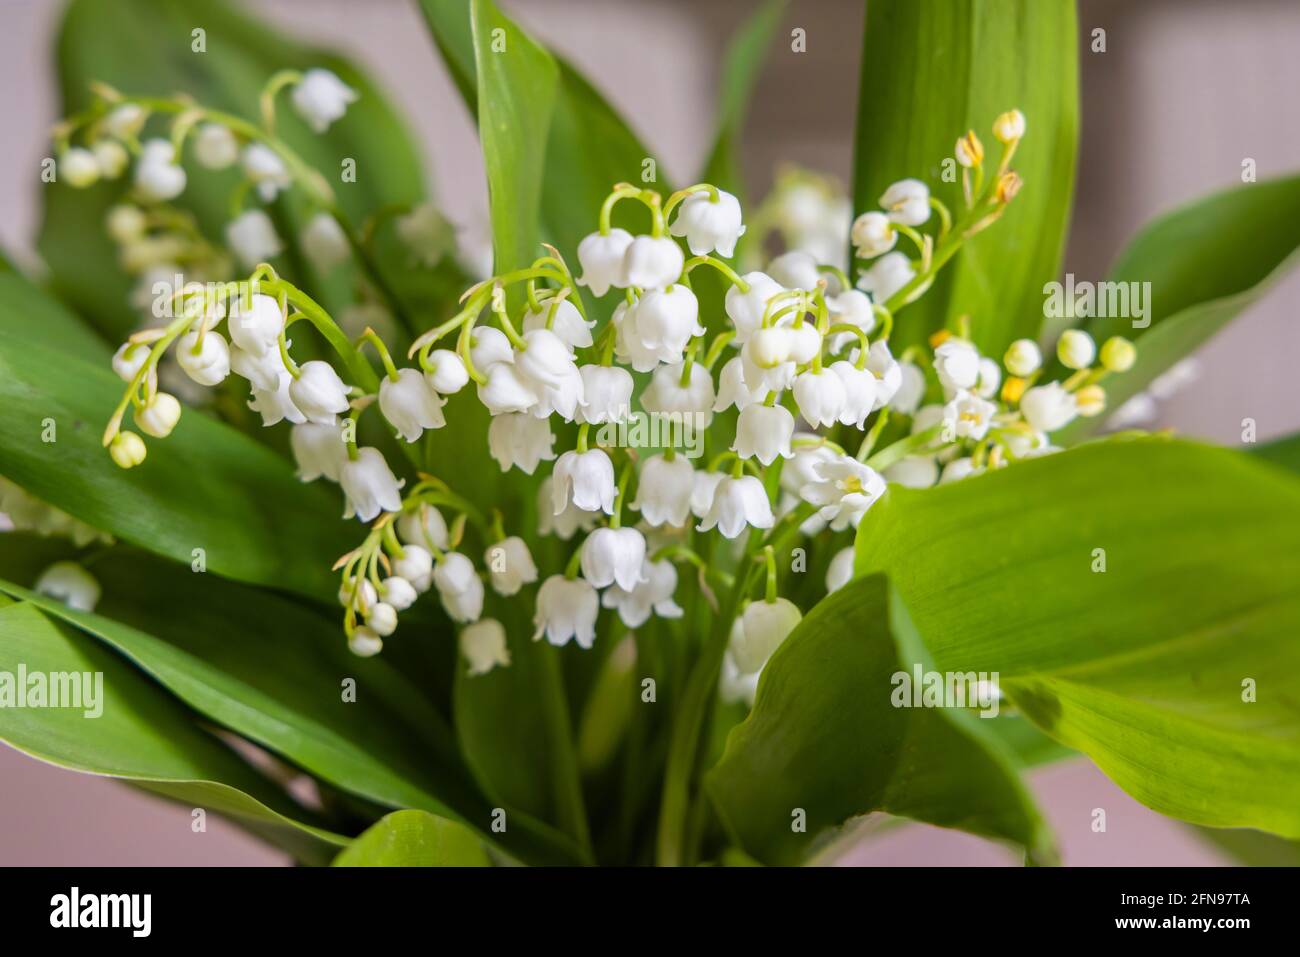 A flower arrangement of delicate, fragrant bell-shaped lily of the valley (Convallaria majalis) in spring from a garden in Surrey, south-east England Stock Photo